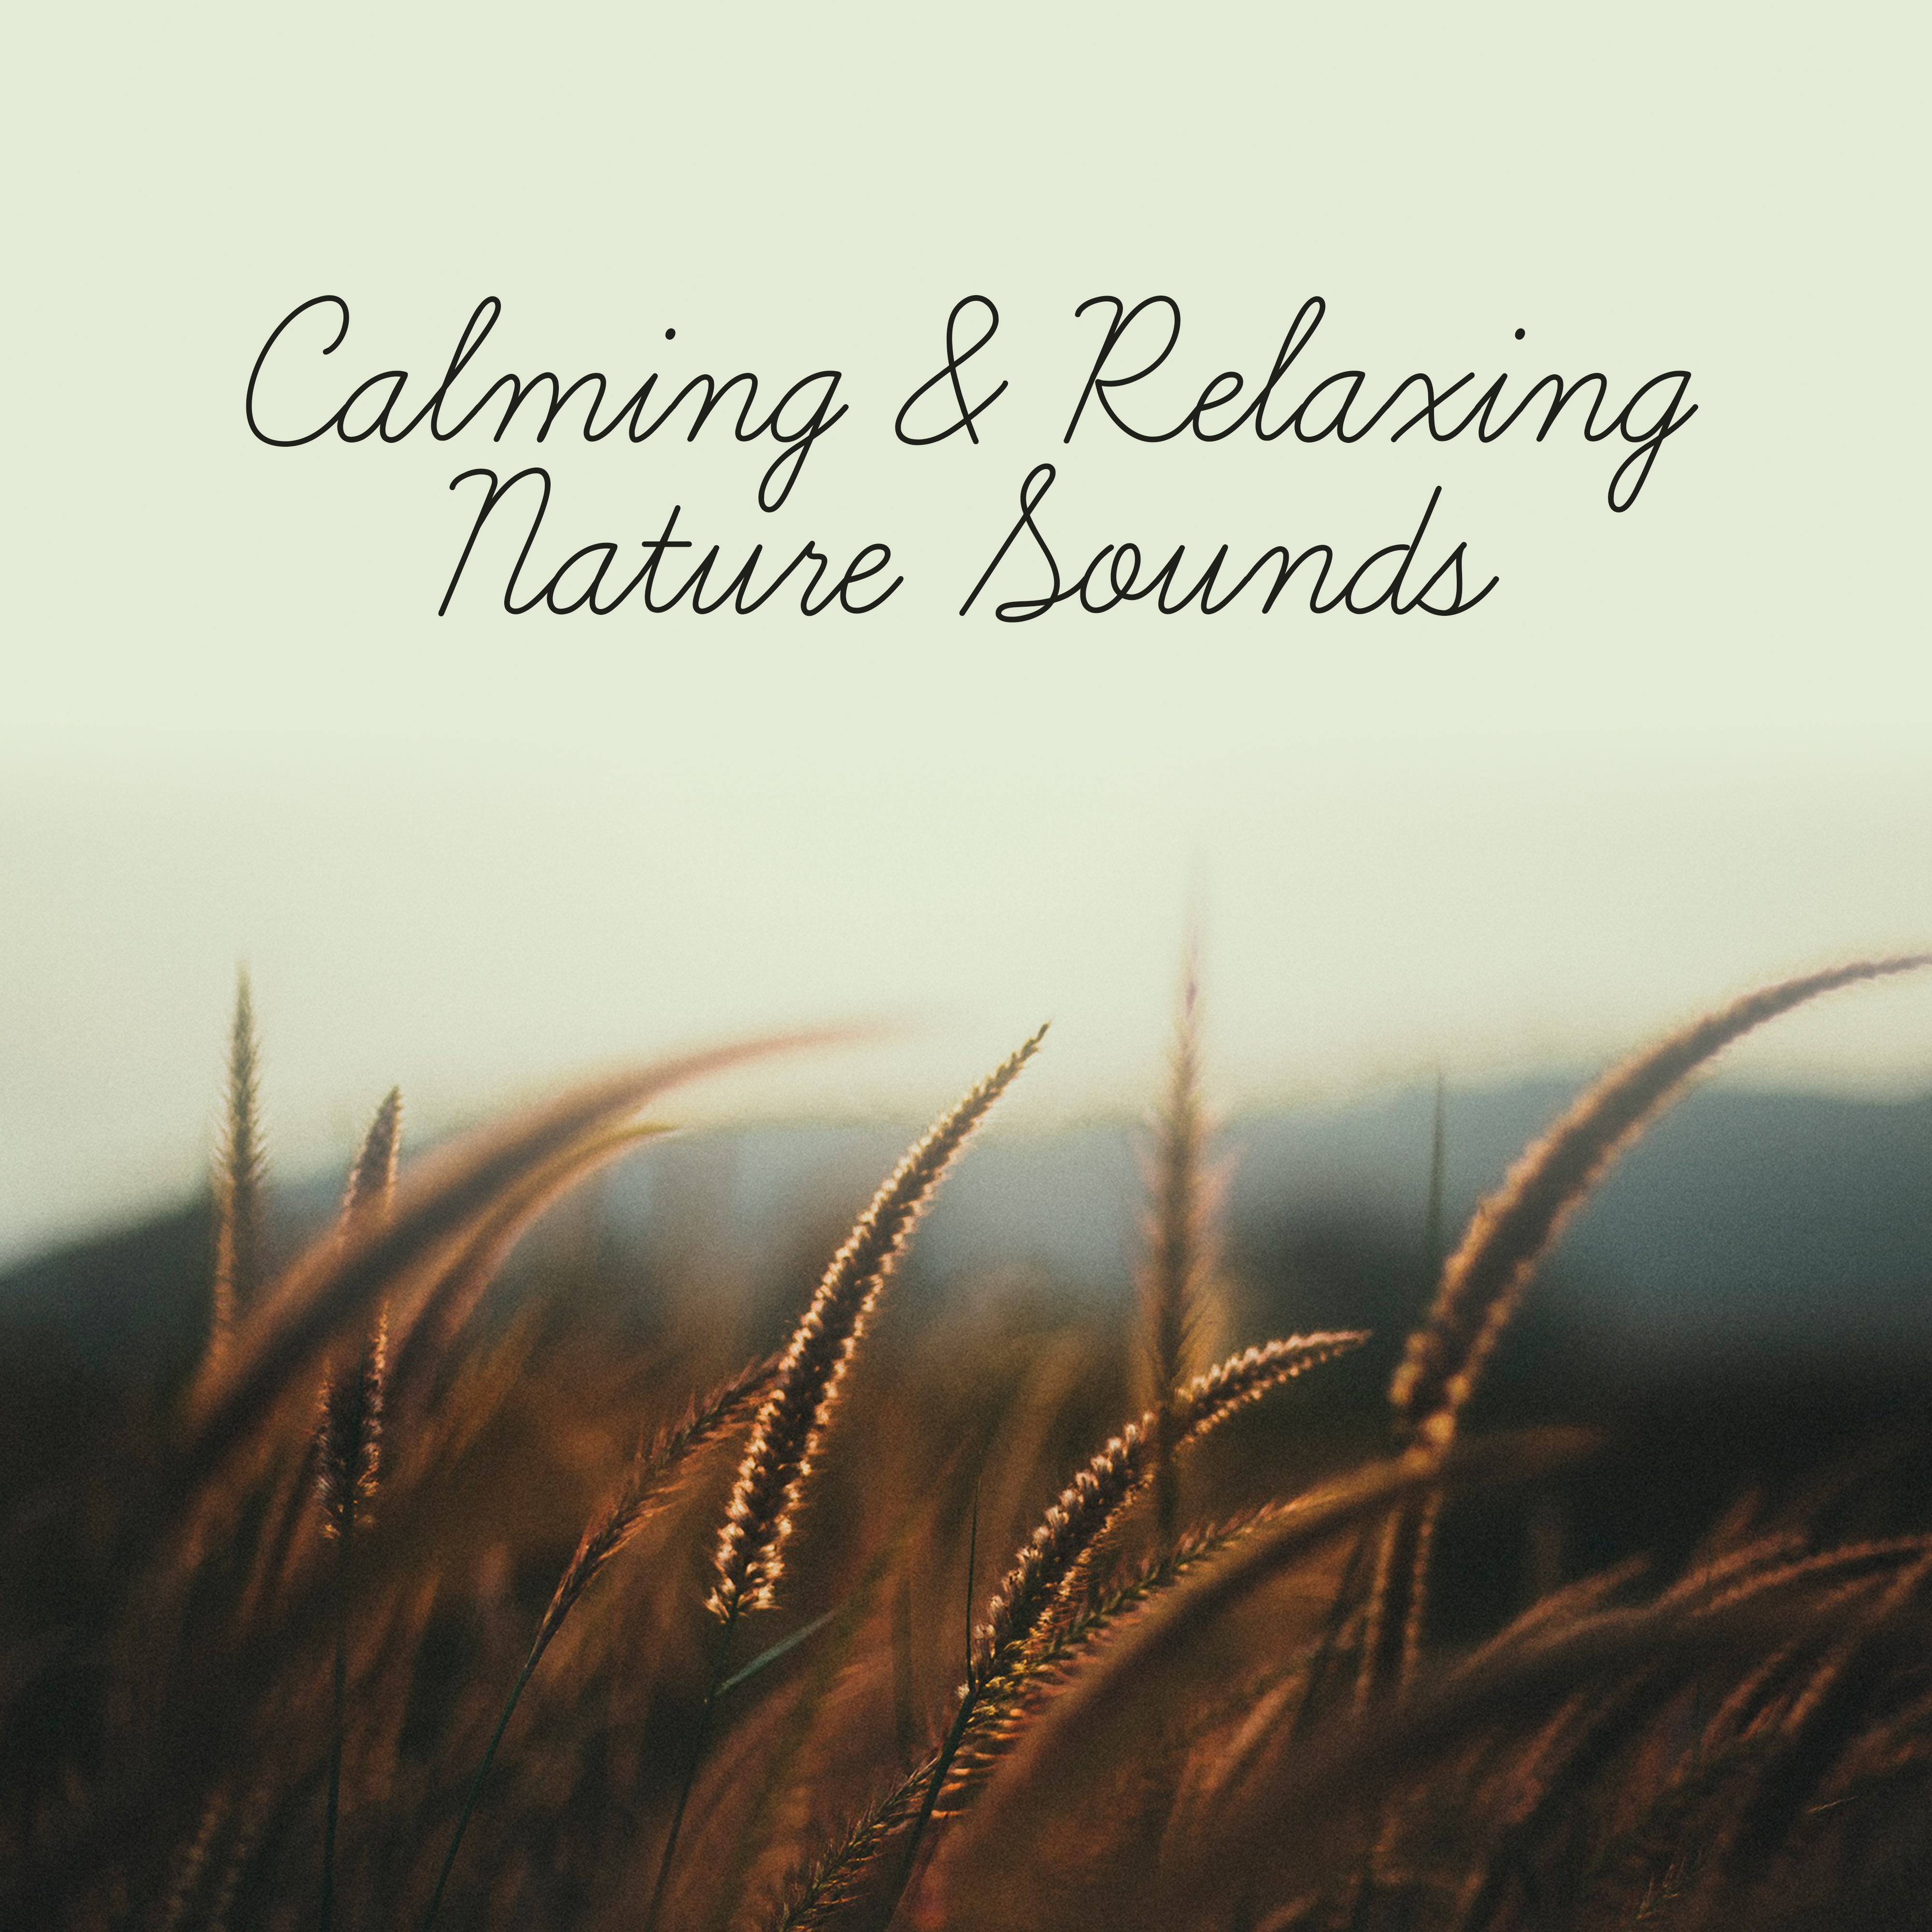 Calming & Relaxing Nature Sounds – Soft Music to Relax, Calm Down with New Age, Rest Yourself